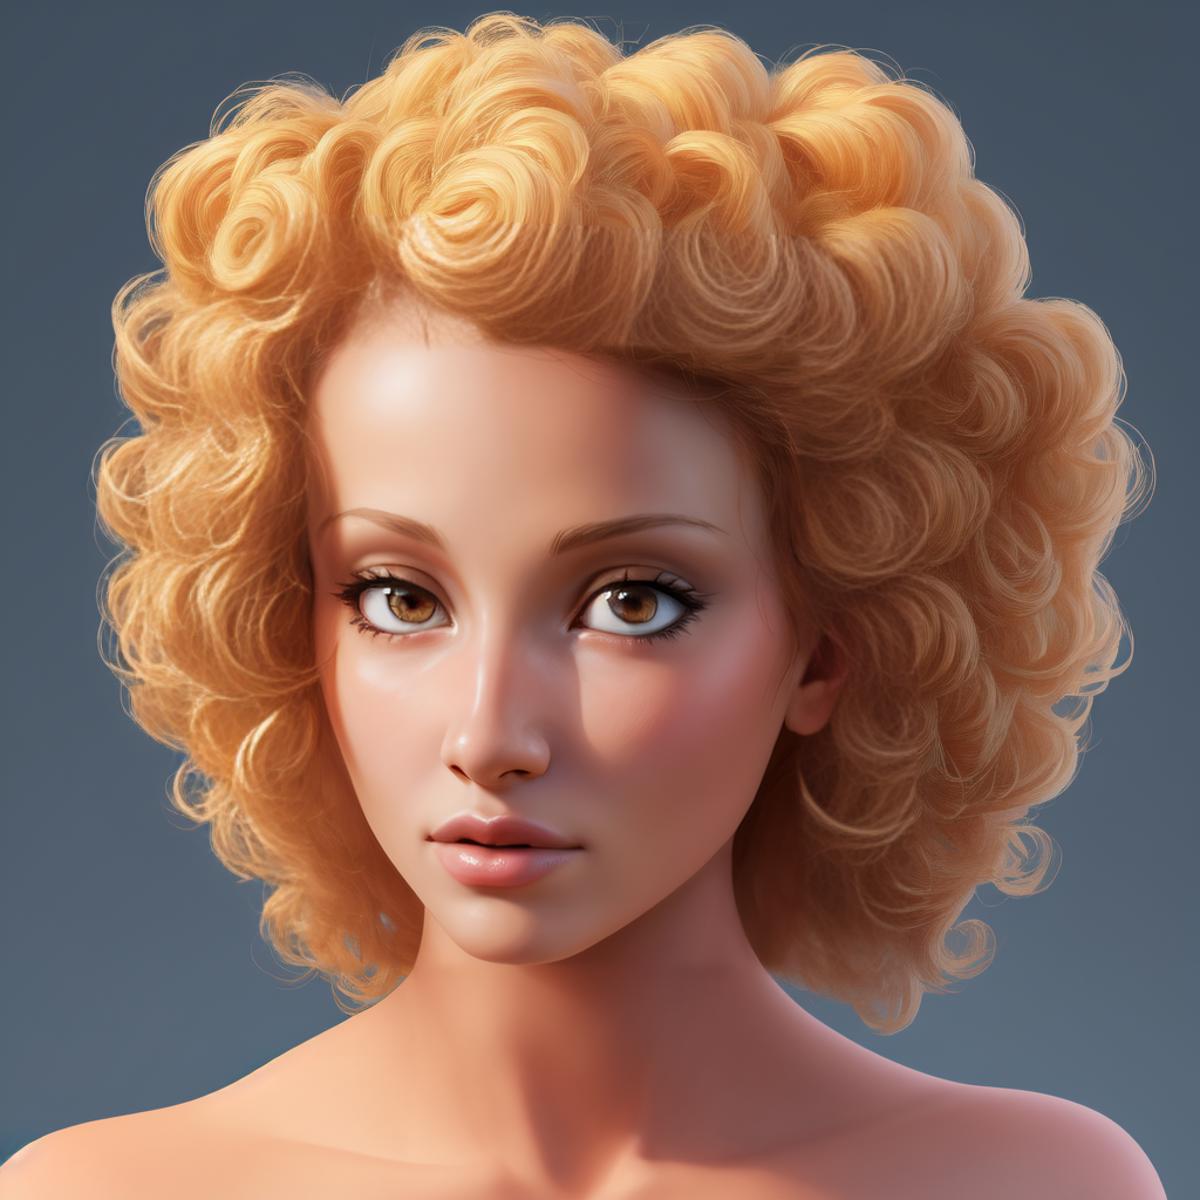 Rogaine - Complete Hair Control image by l0ud_ninja